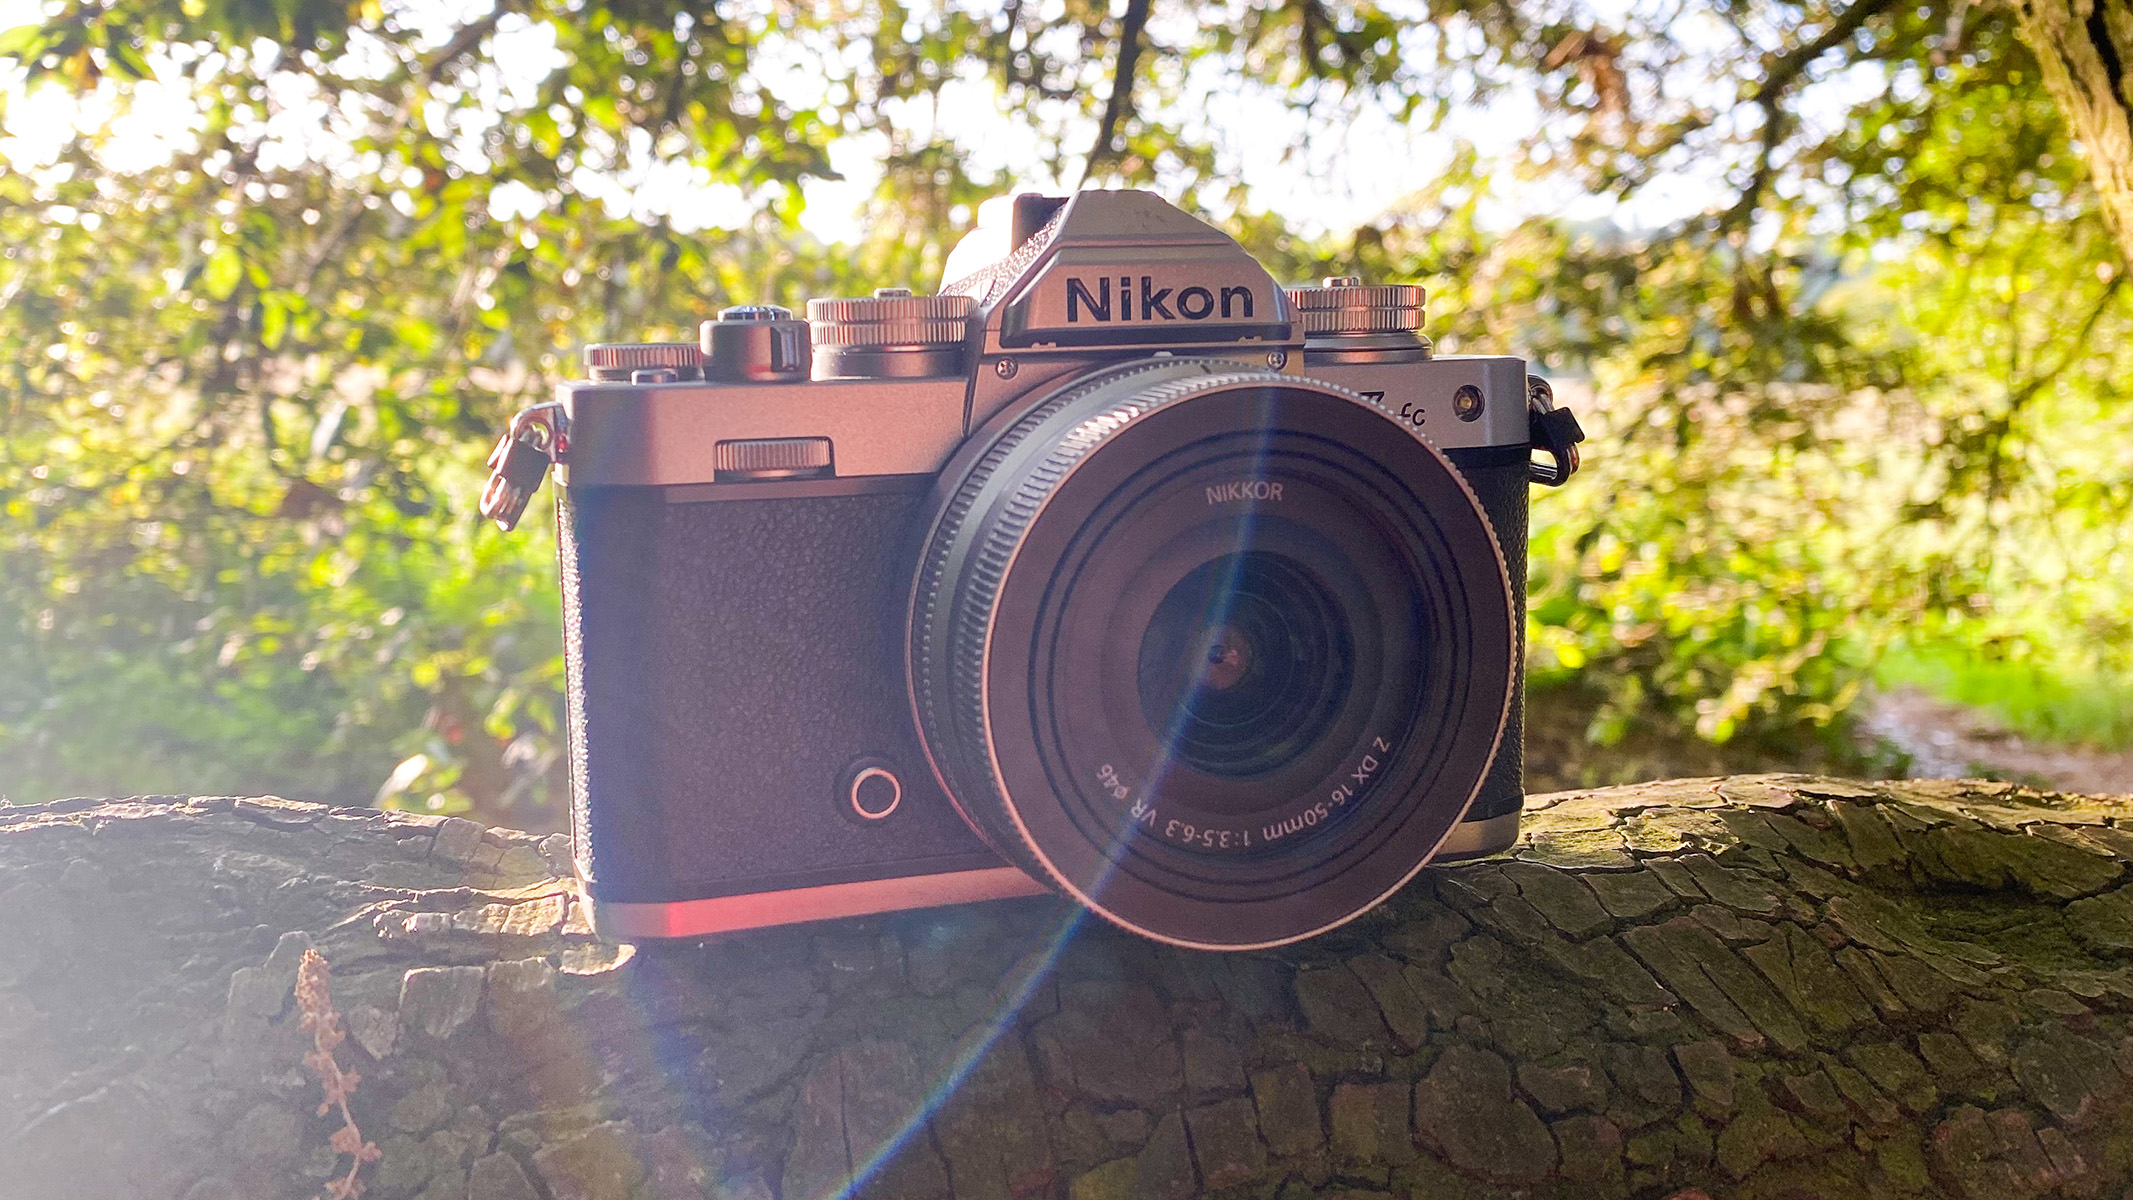 Nikon Z fc placed atop a fallen tree, with light hitting the back leaf, shone in the image from left